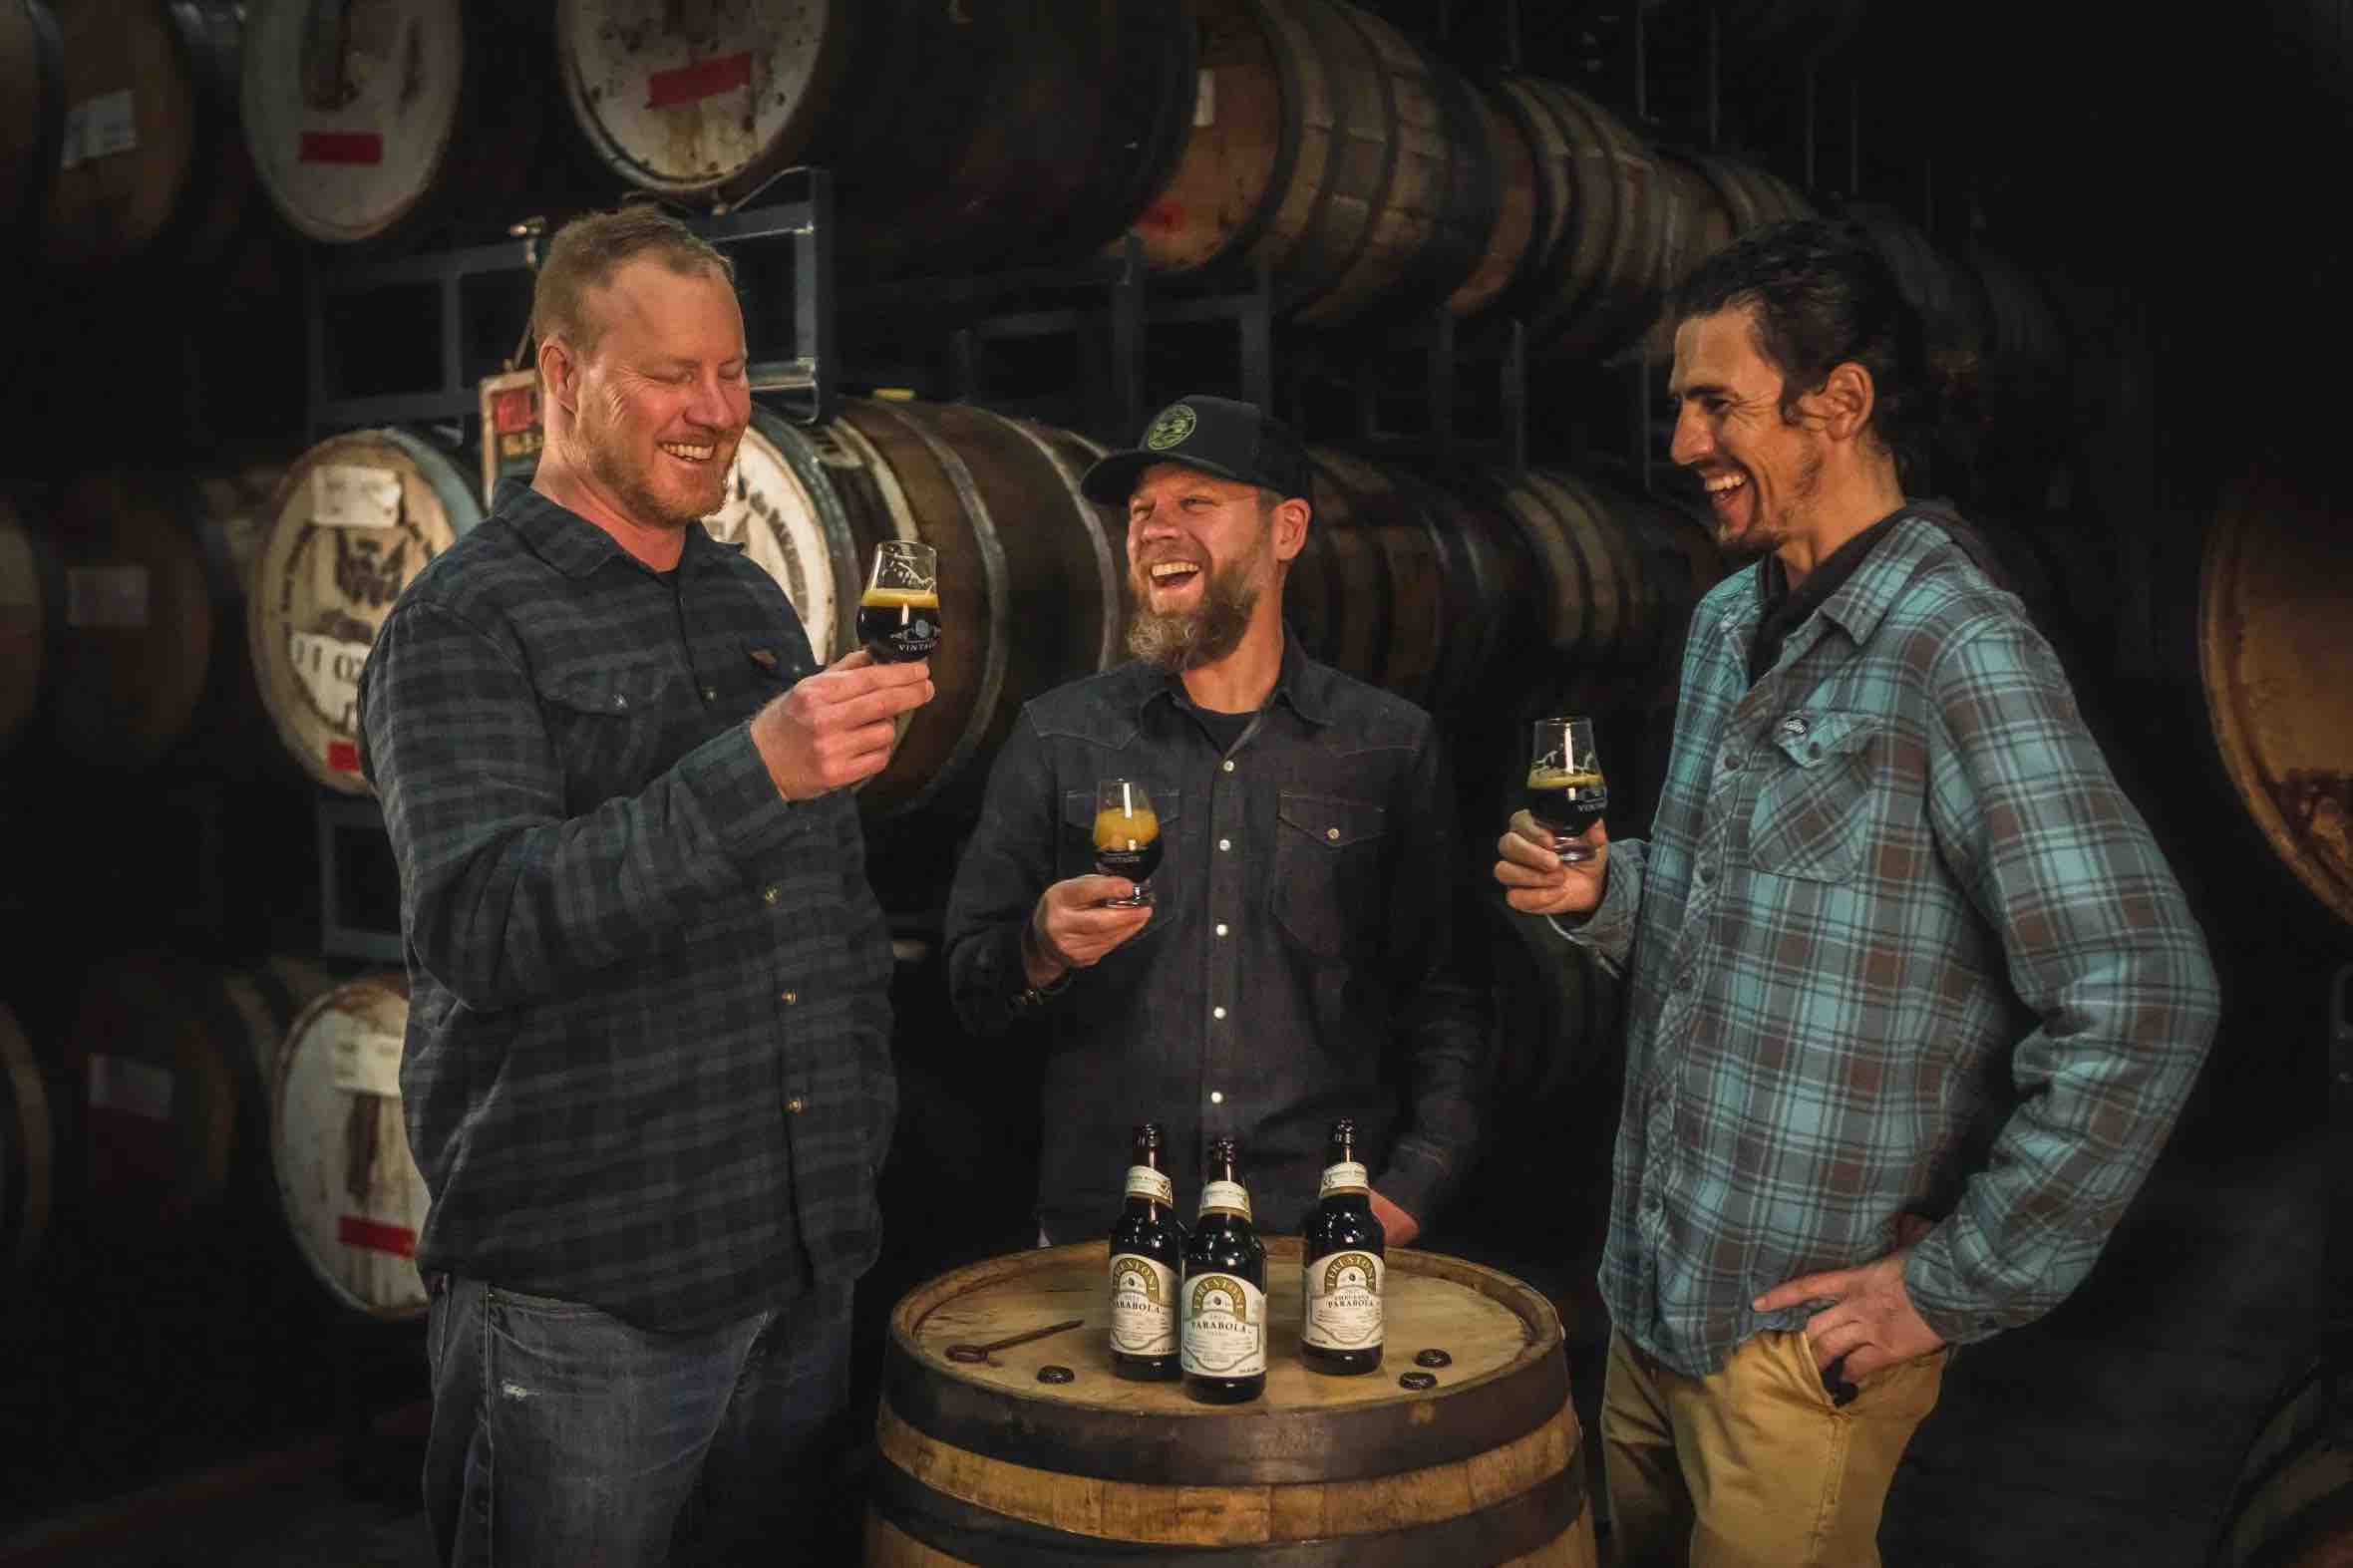 image of Jim Crooks, Matt Brynildson, and Eric Ponce courtesy of Firestone Walker Brewing